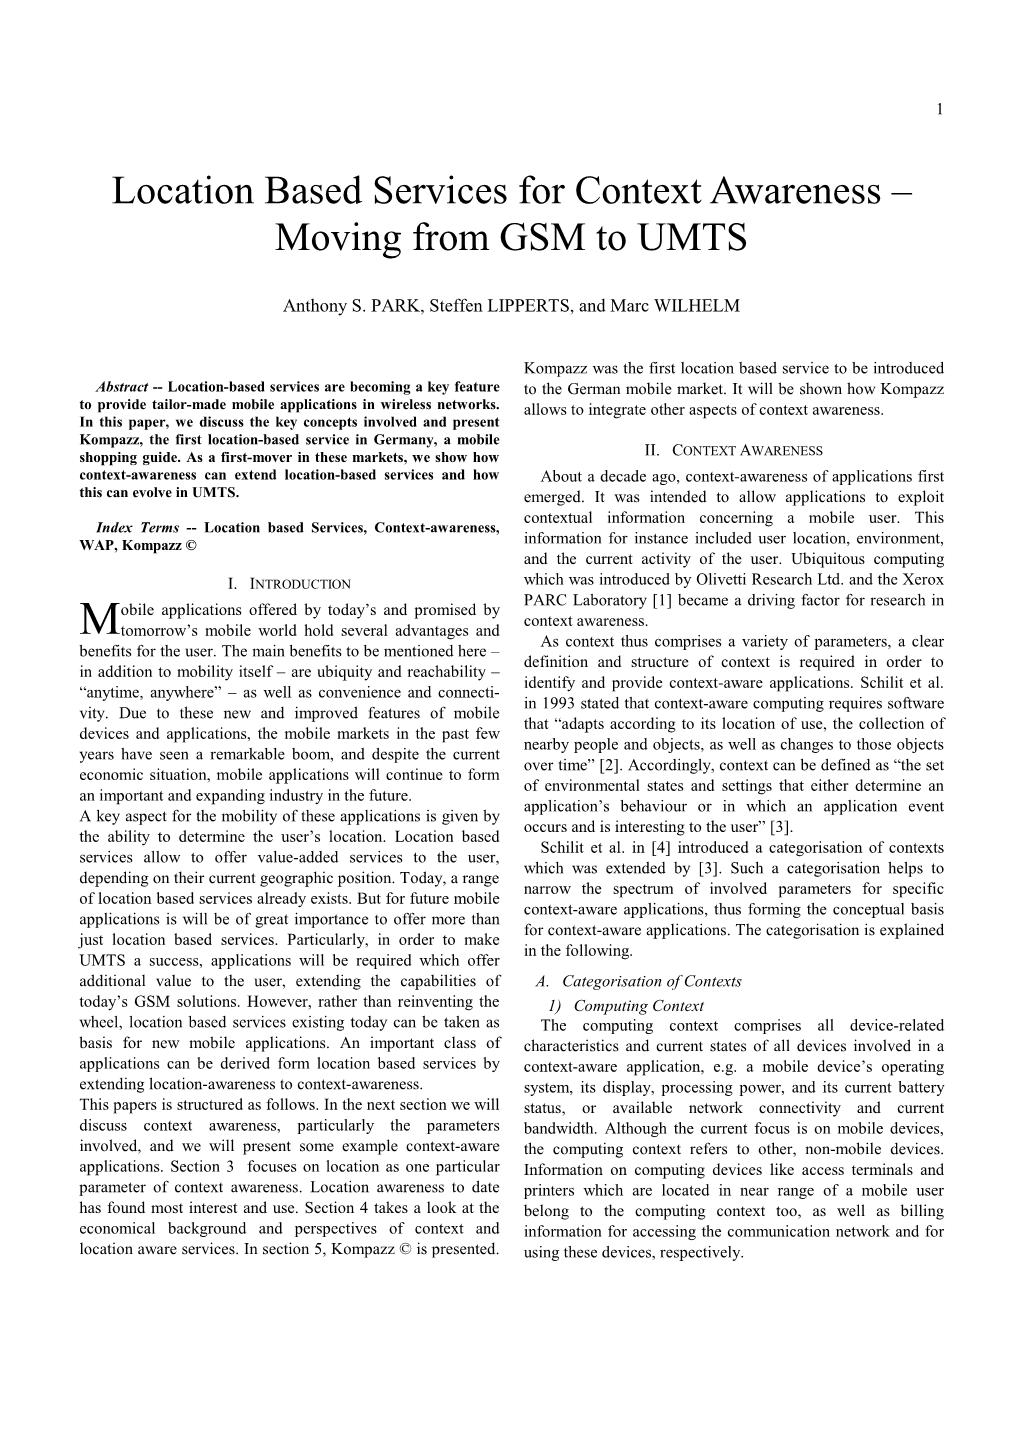 Location Based Services for Context Awareness – Moving from GSM to UMTS